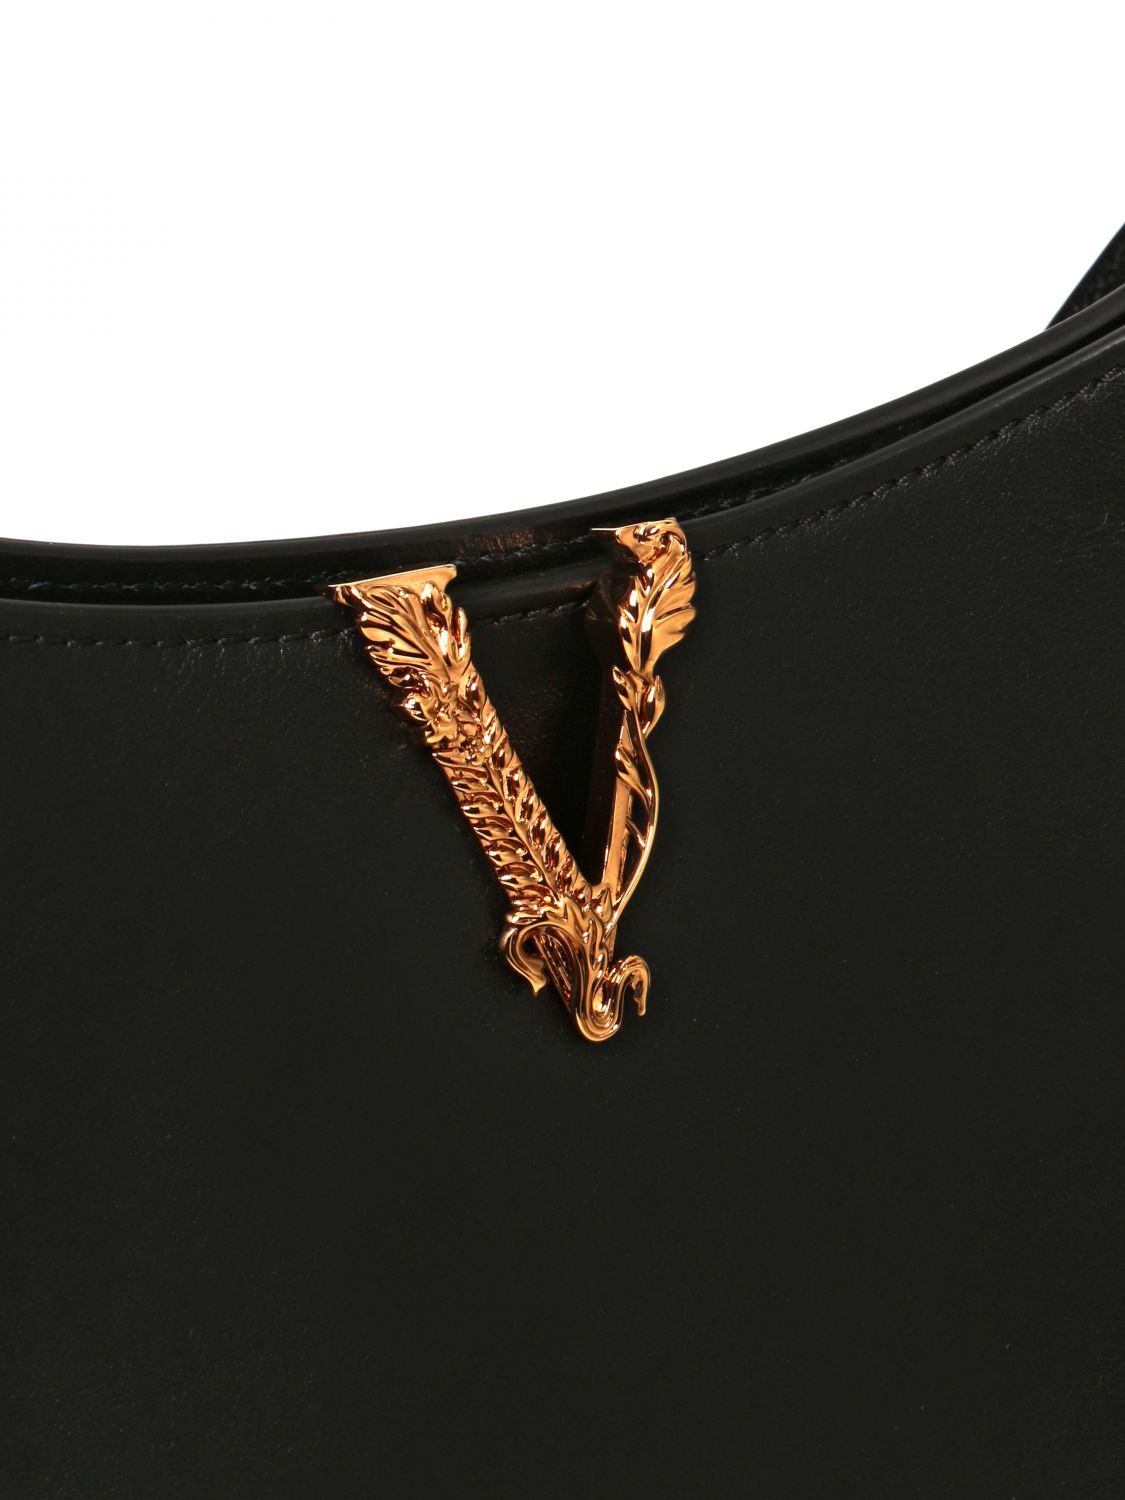 Versace Black Quilted Virtus Chain Shoulder Bag - Fablle